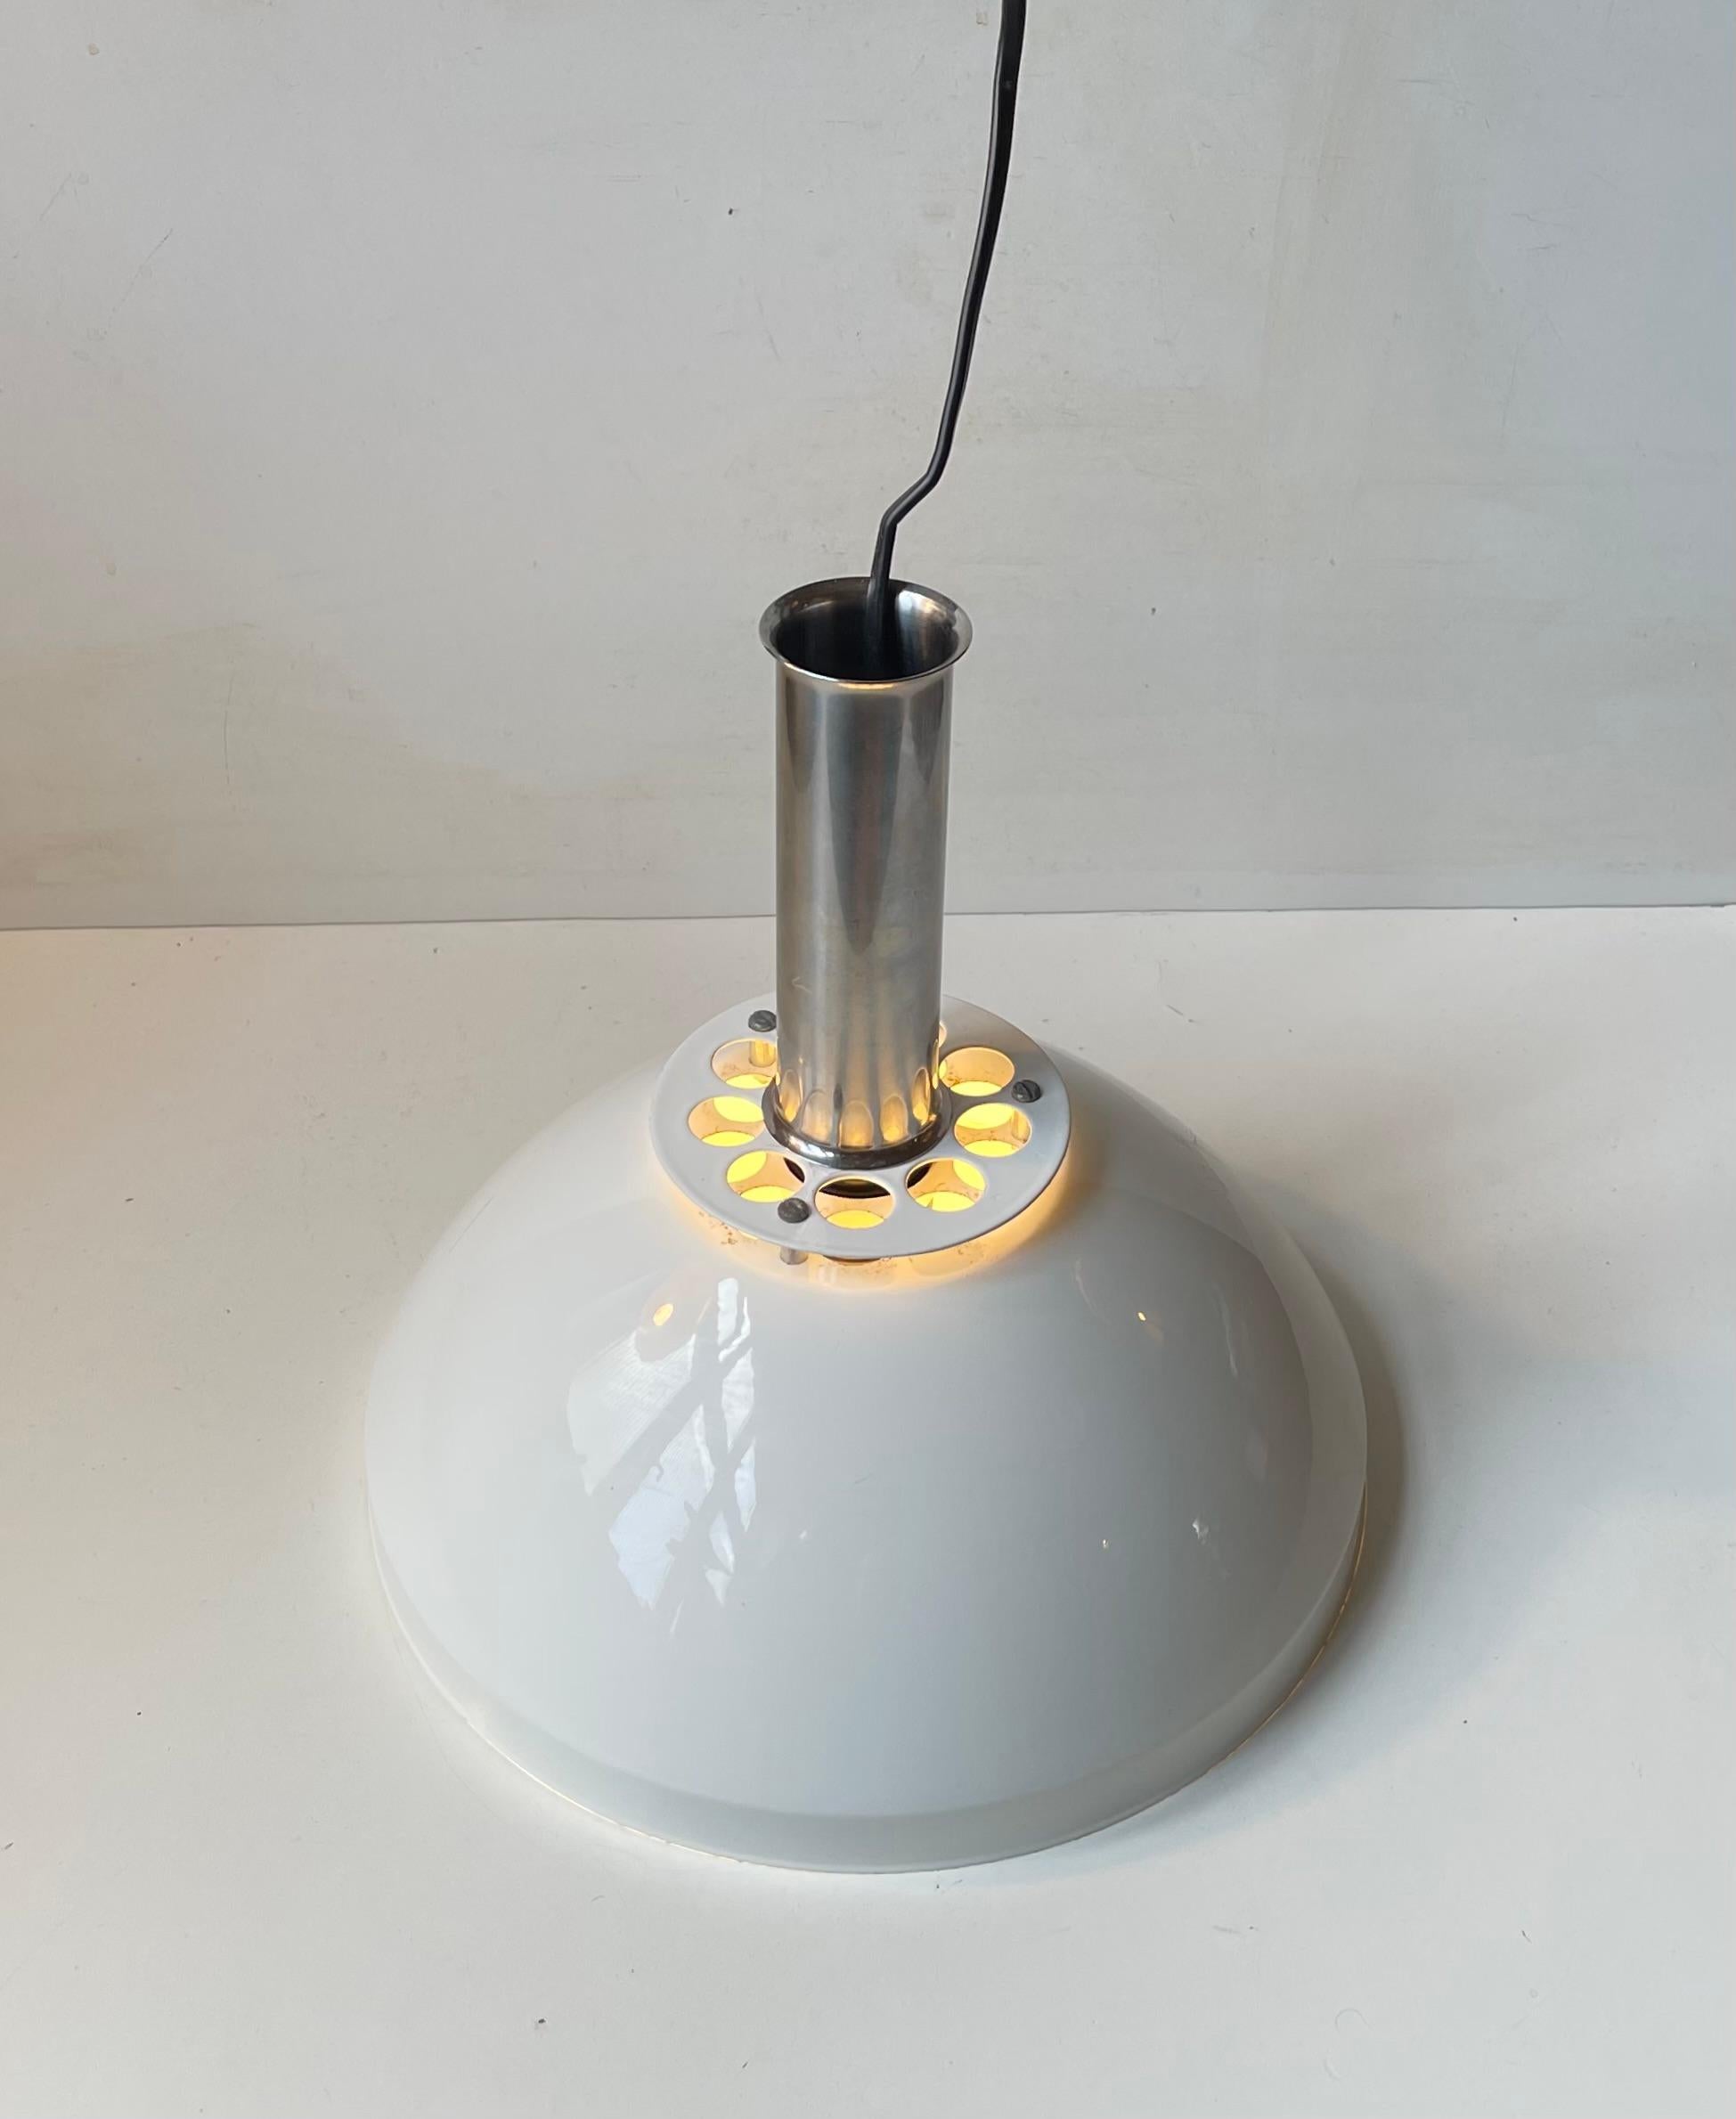 Italian Industrial Ceiling Lamp in White Enamel and Chrome Plating, 1970s For Sale 1